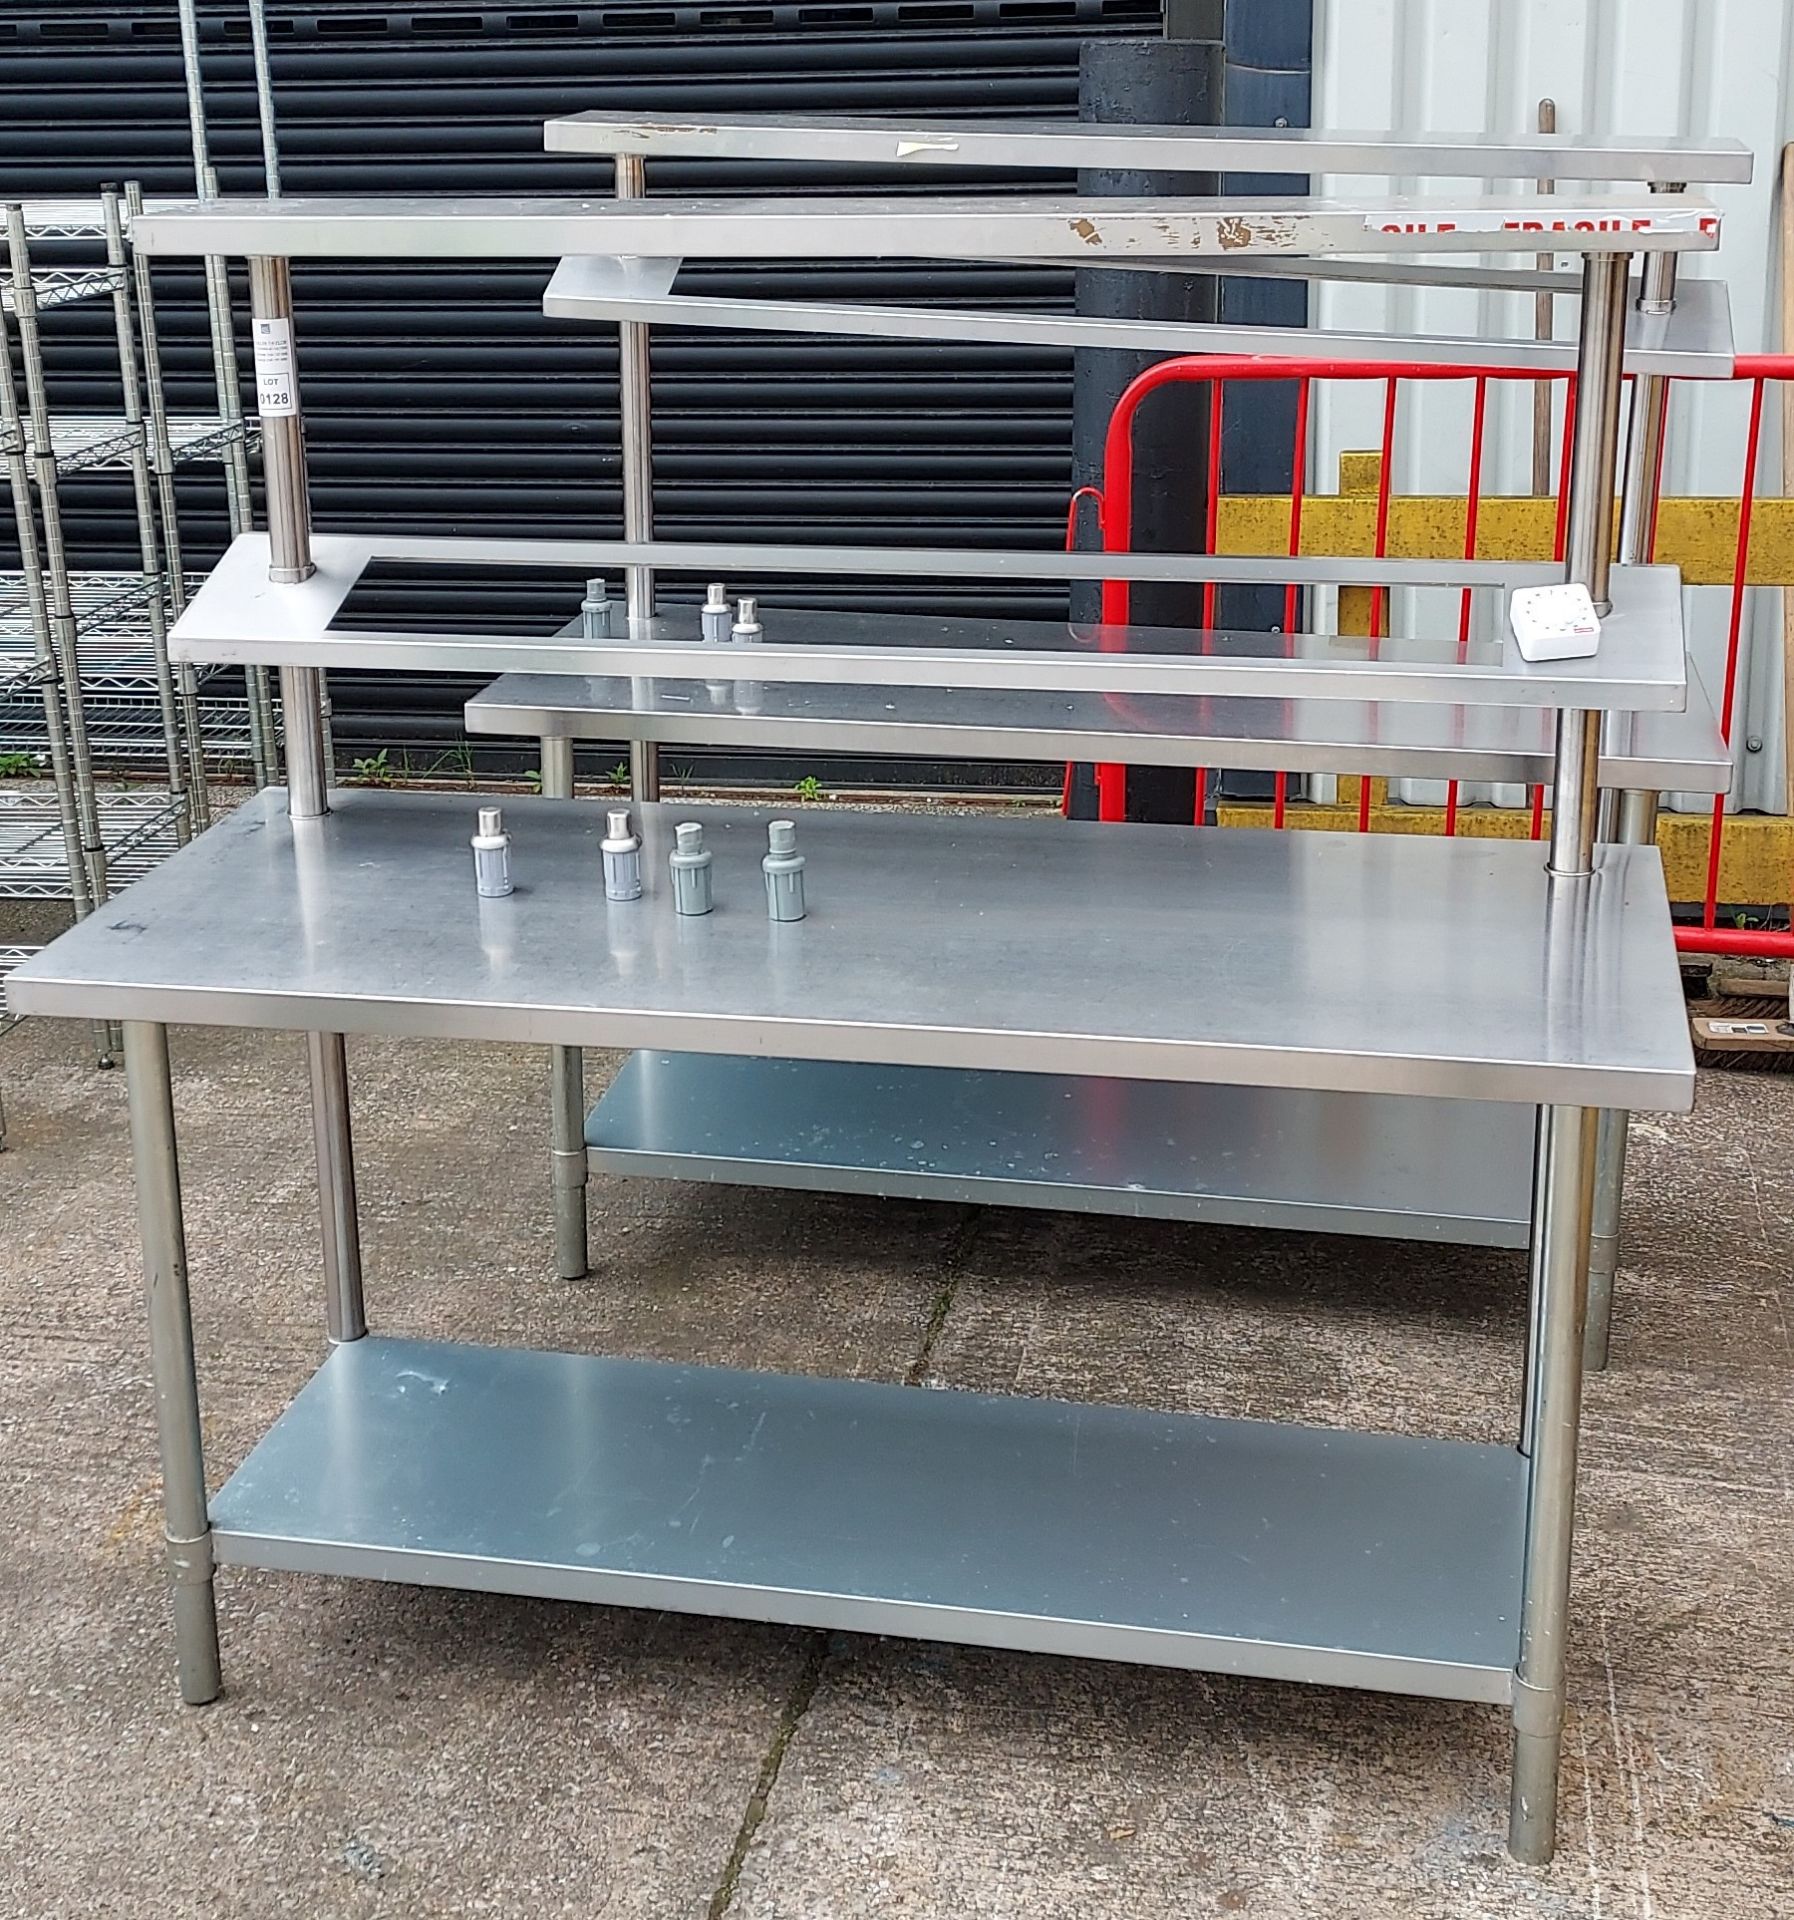 2 X STAINLESS STEEL PREP TABLES 3 TIER WITH GANTRY BOTH - ( 150 CM HEIGHT X 150 CM WIDTH X 60 CM